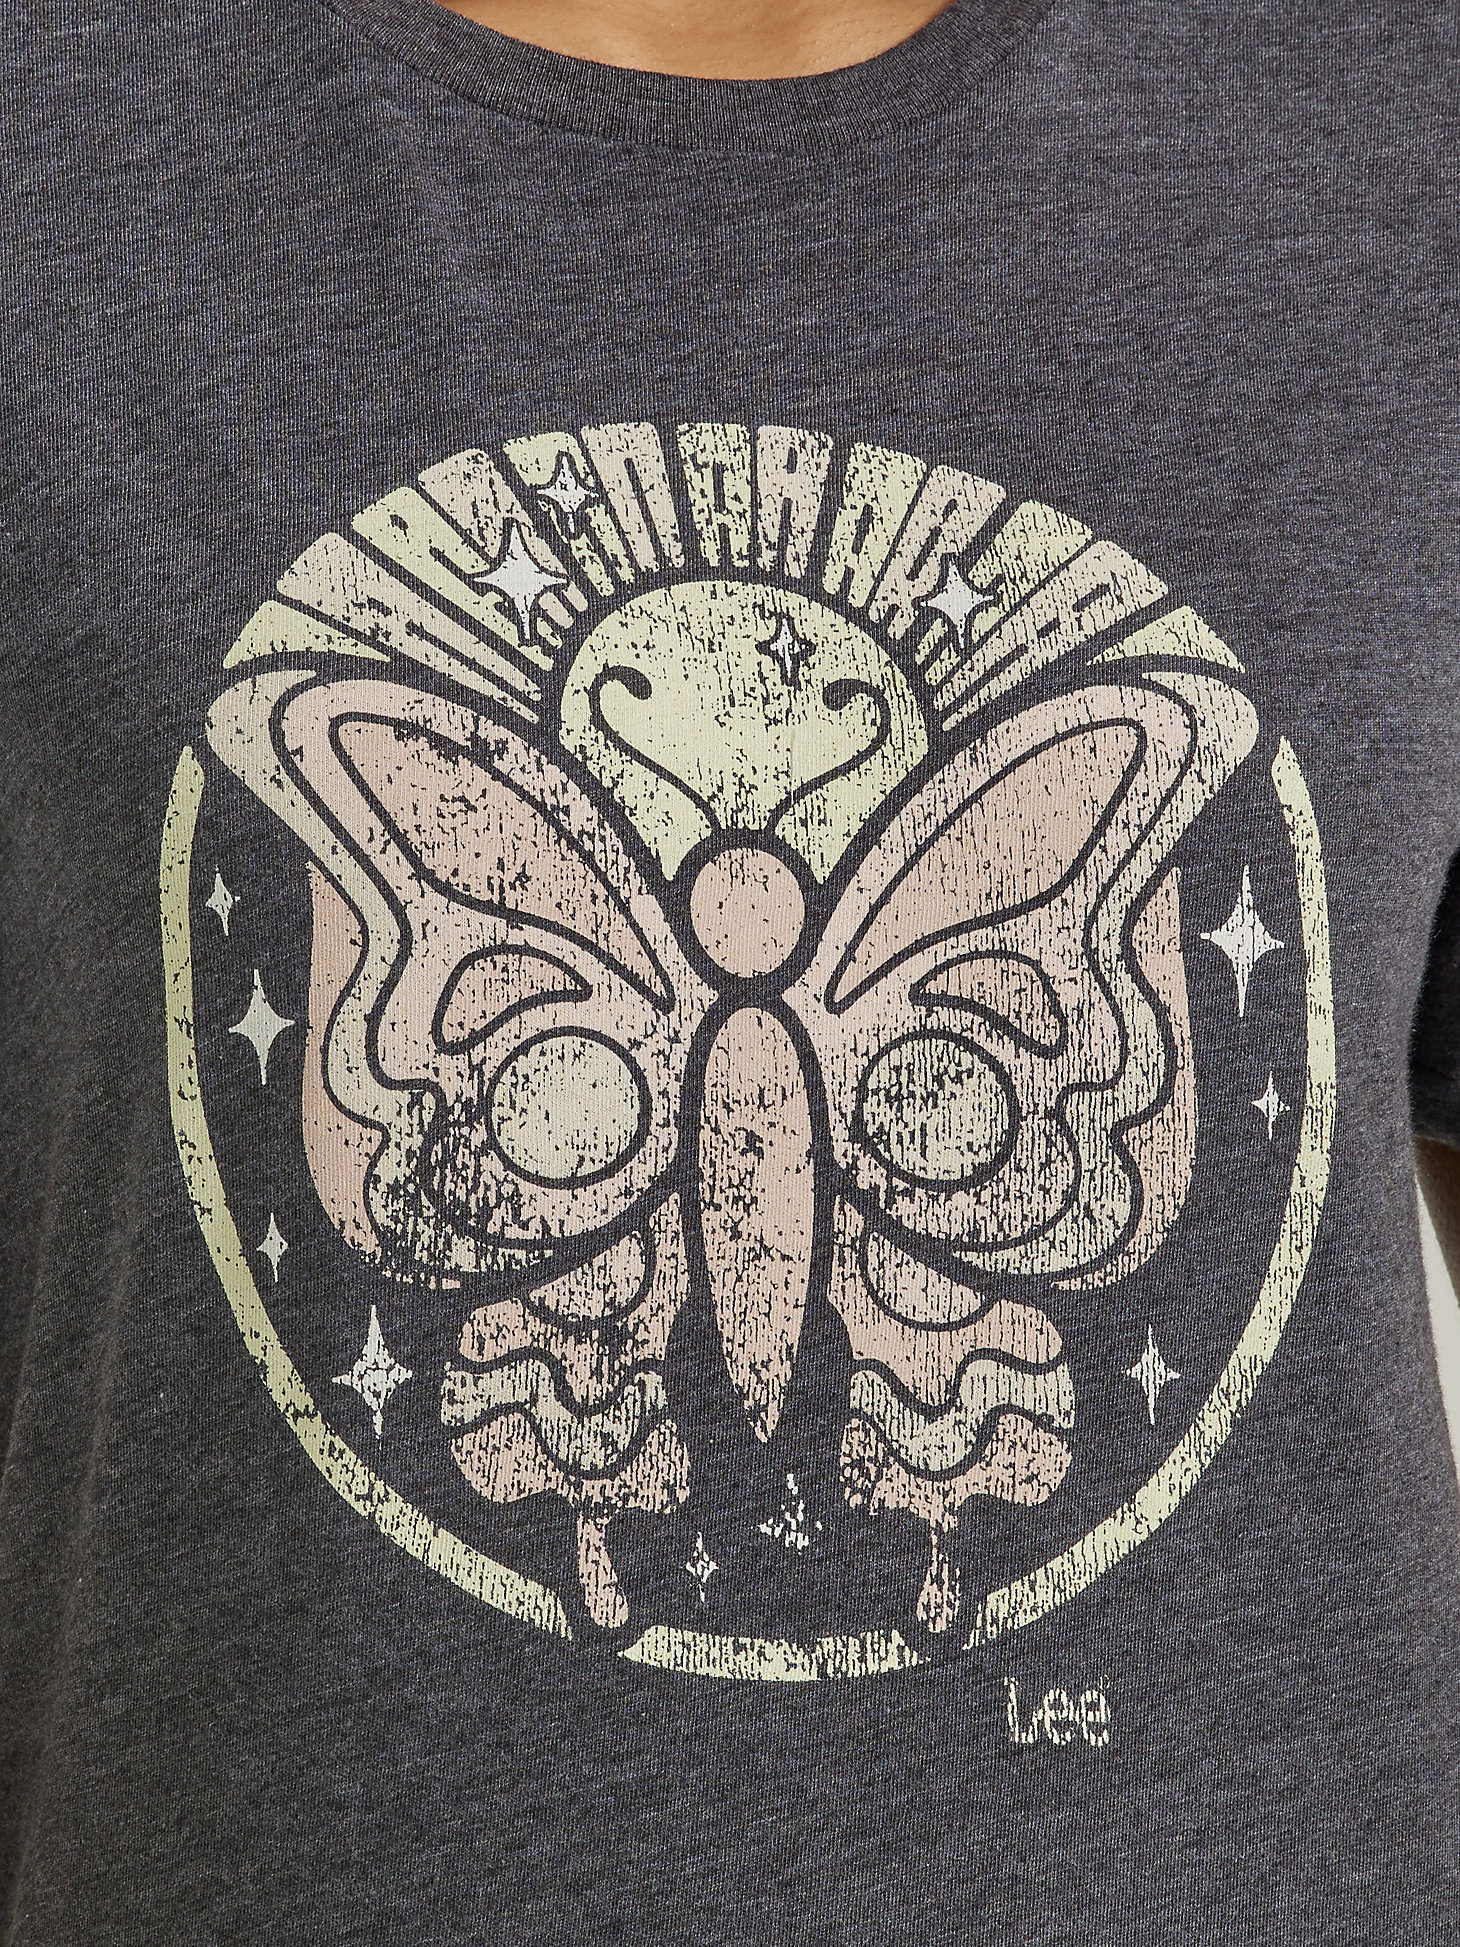 Women's Butterfly Graphic Tee in Charcoal Heather alternative view 2